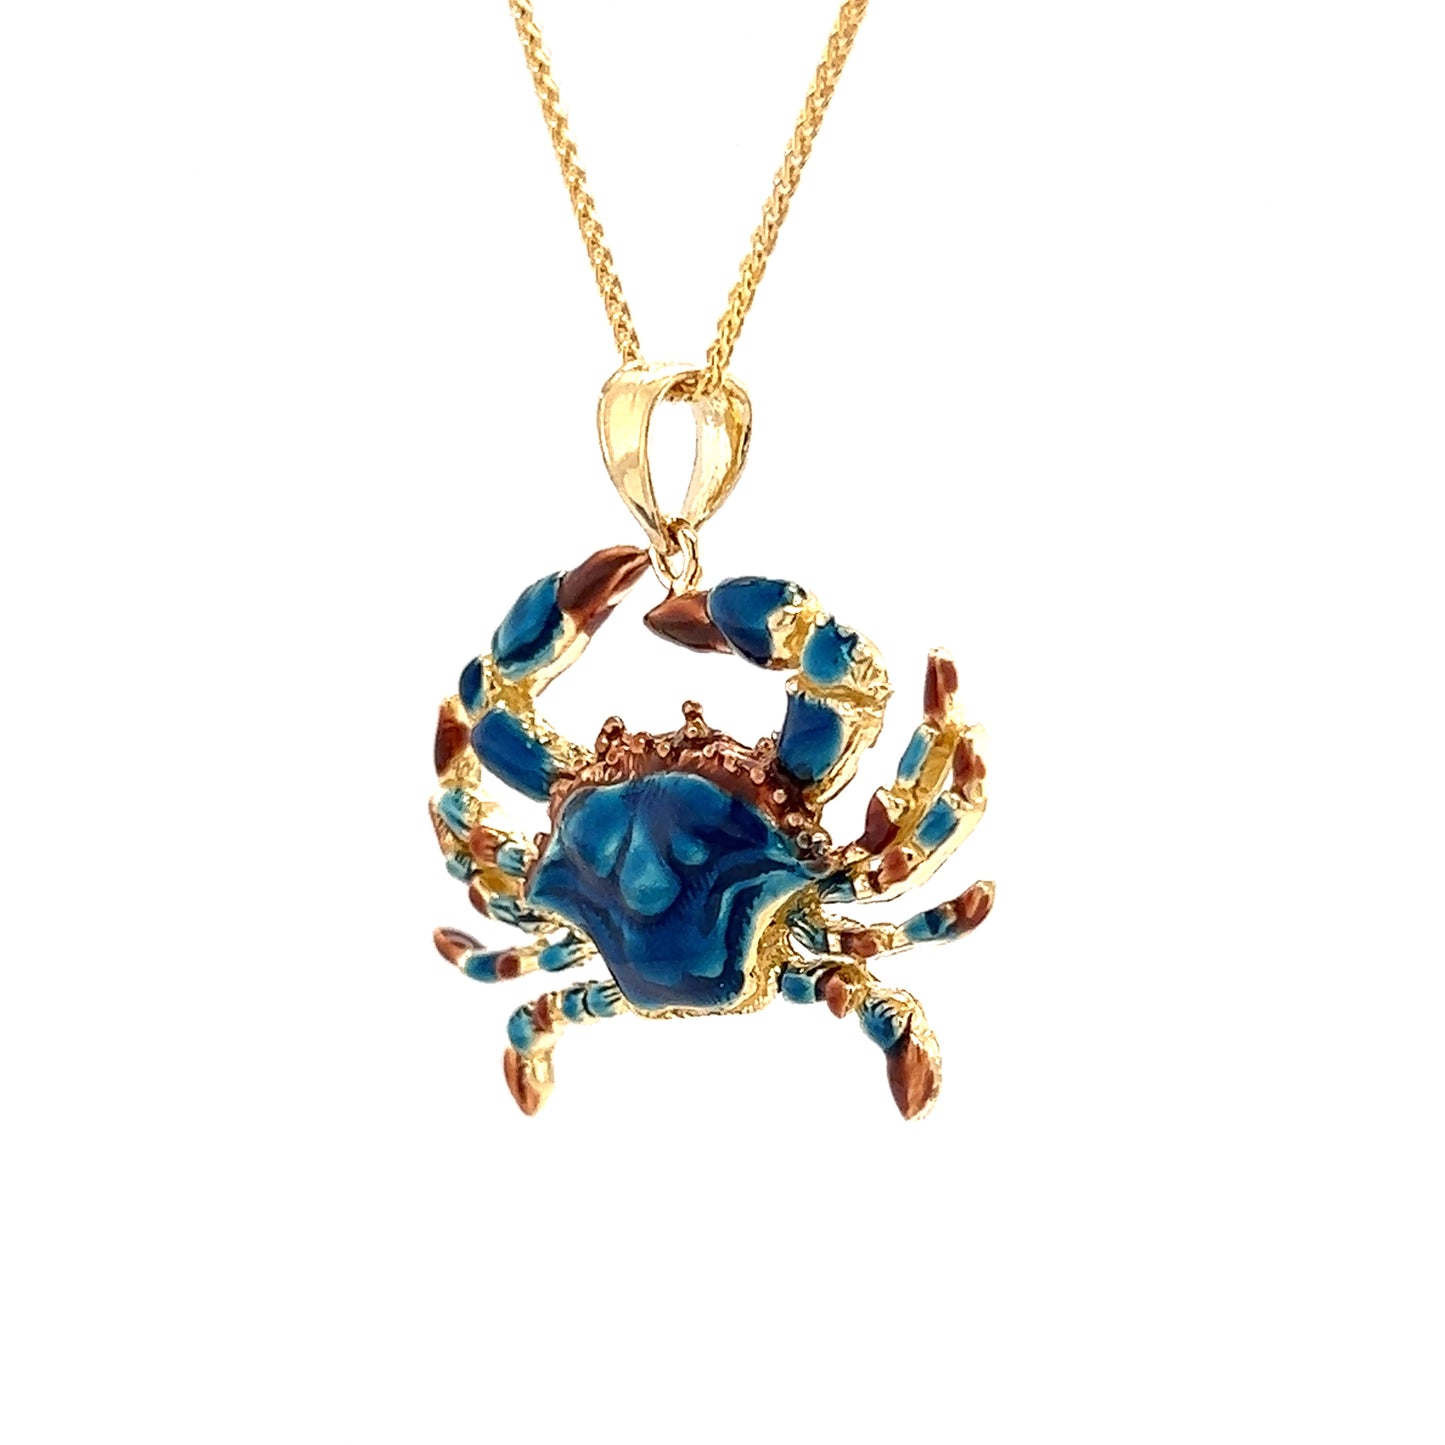 Blue Crab Large Pendant with Enameling in 14K Yellow Gold Right Side View with Chain